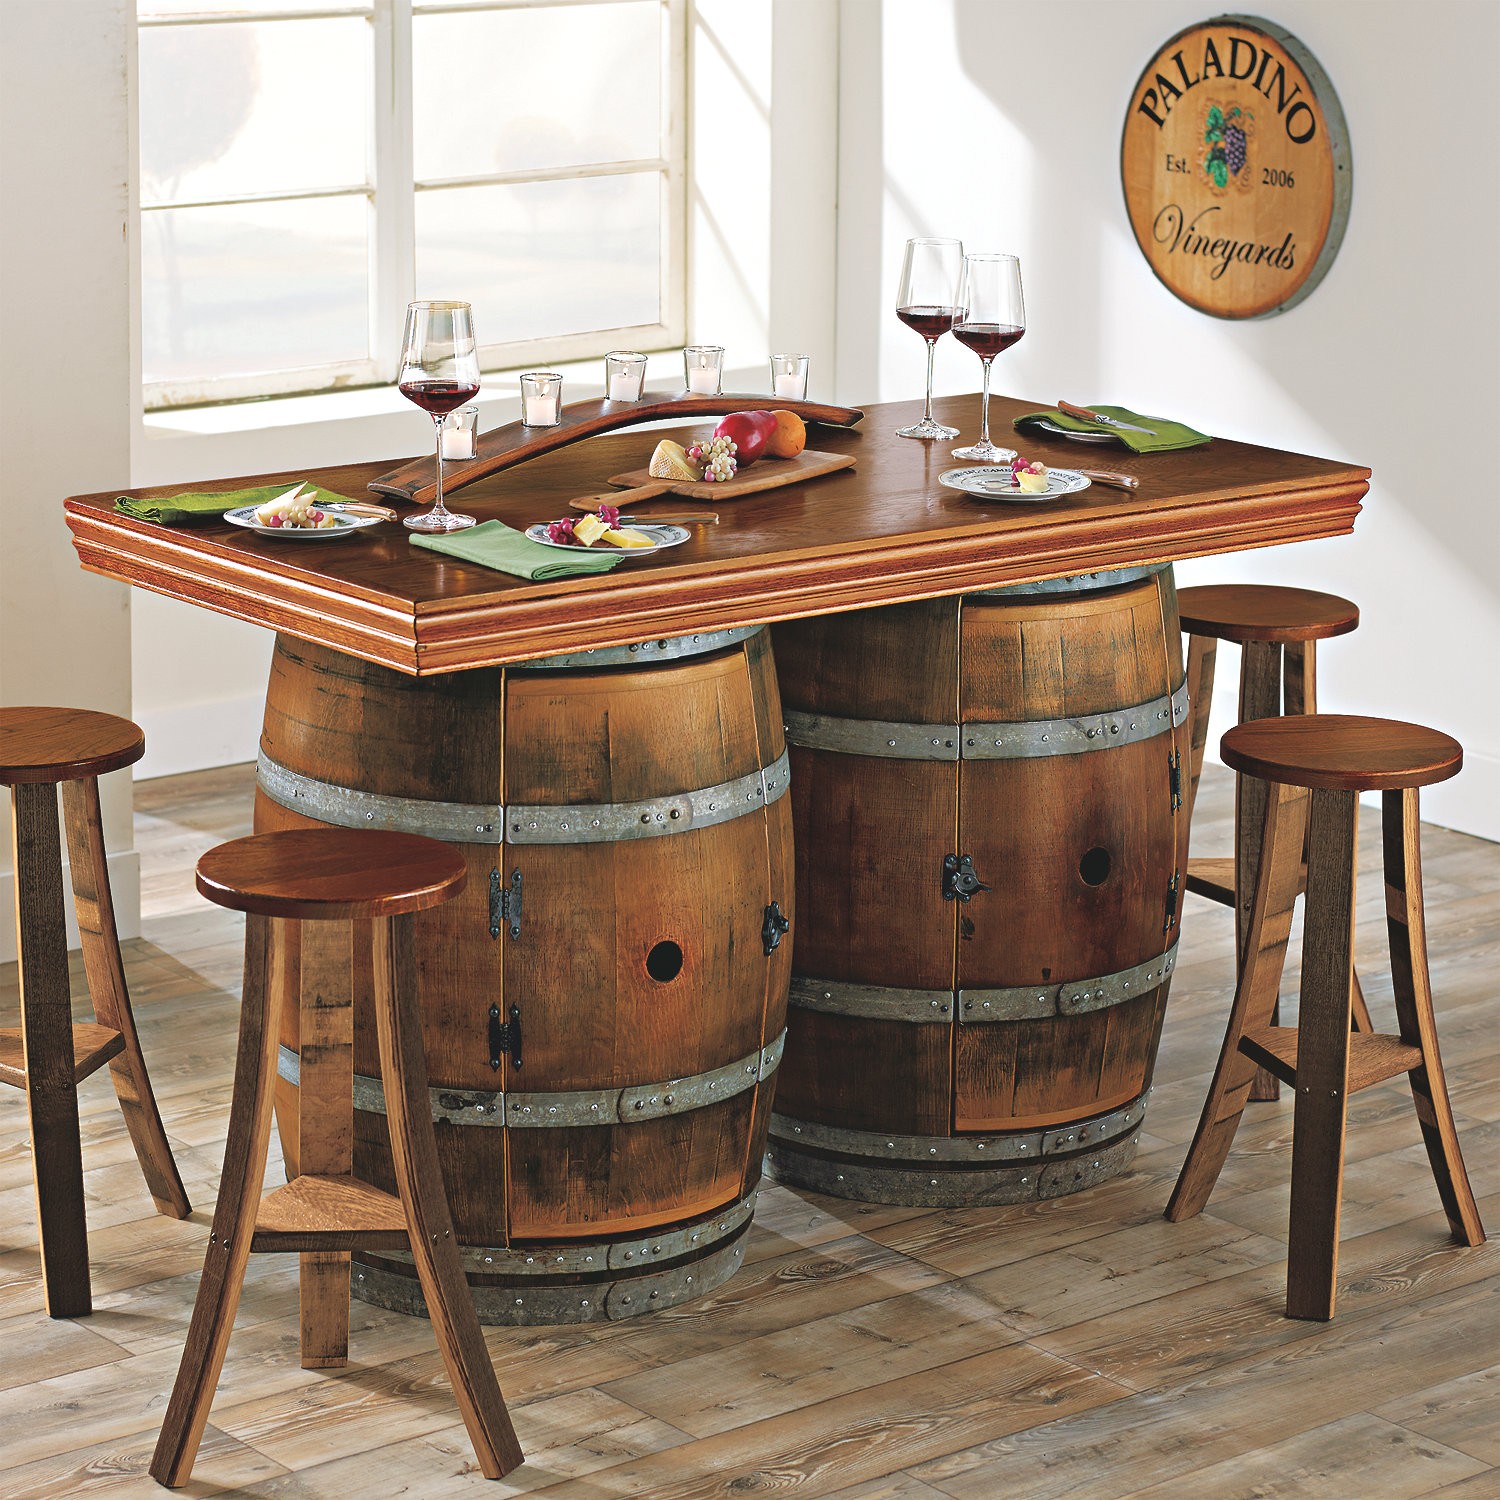 Wine Barrel Table And Chairs A Creative Mom